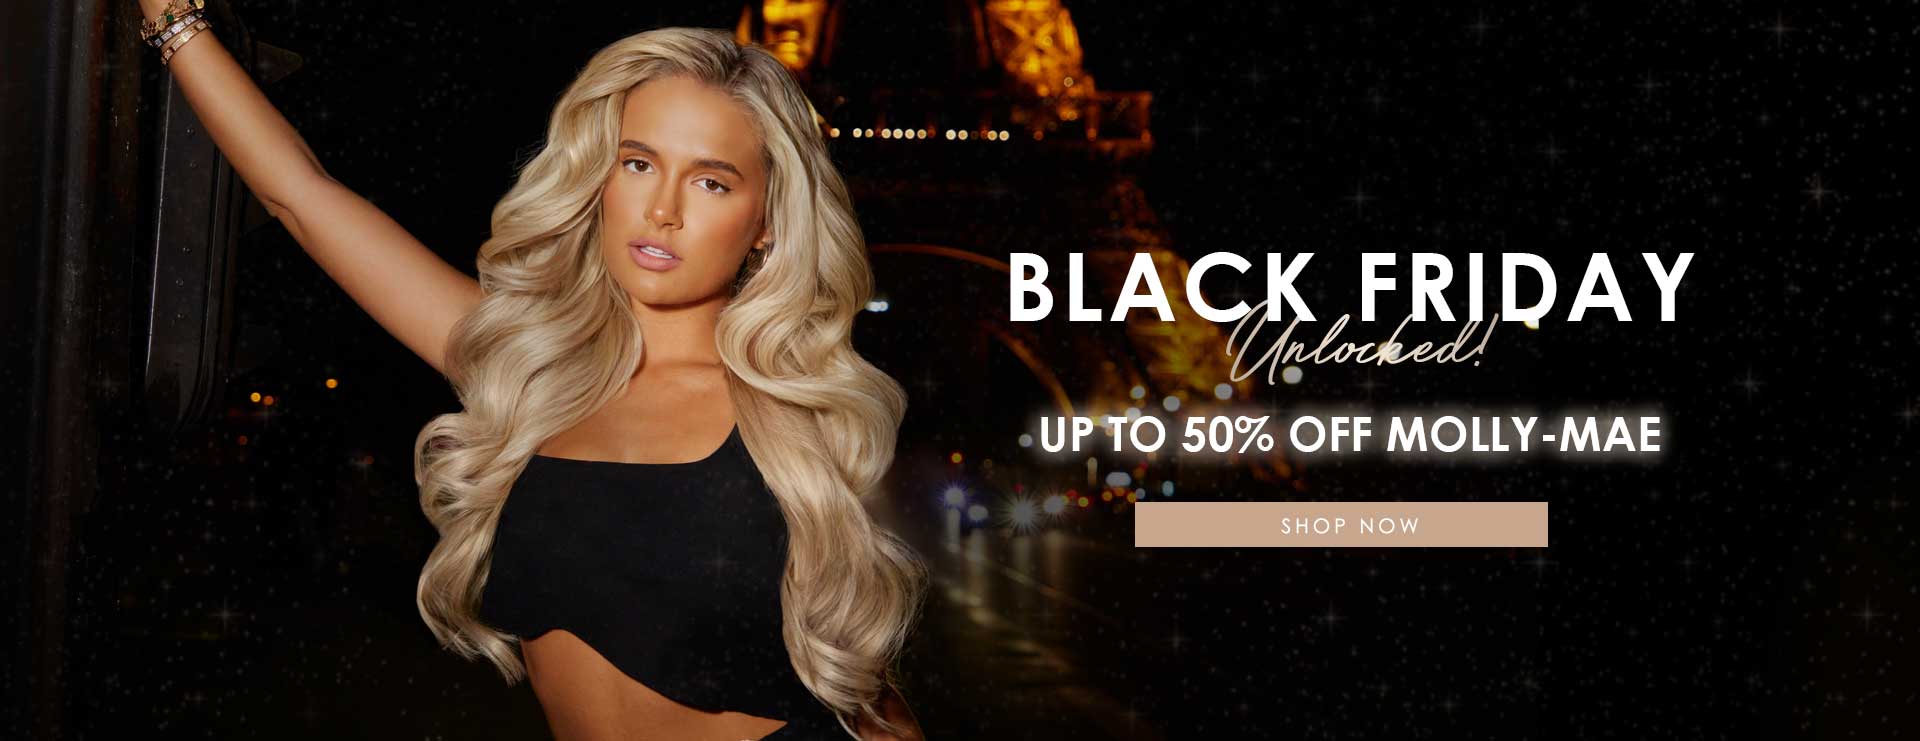 Beauty Works Online Black Friday Promotions 3rf